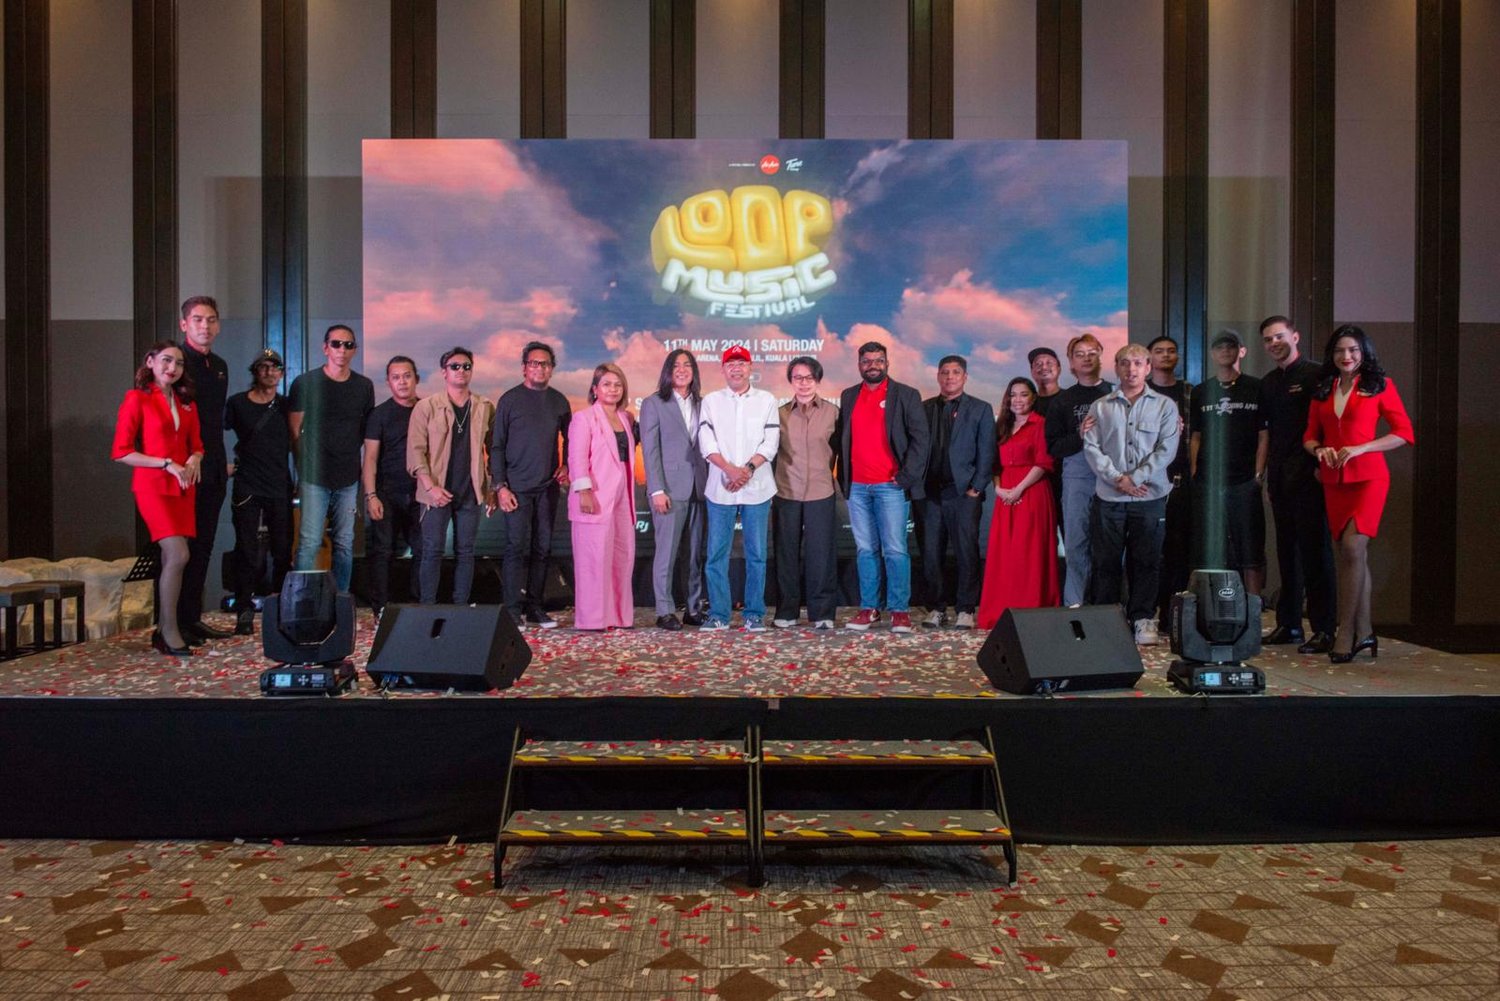 AirAsia and Tune Group are joining forces to present the LOOP Music Festival, a vibrant celebration of music and entertainment scheduled for May 11th, 2024, at the Axiata Arena in Kuala Lumpur.